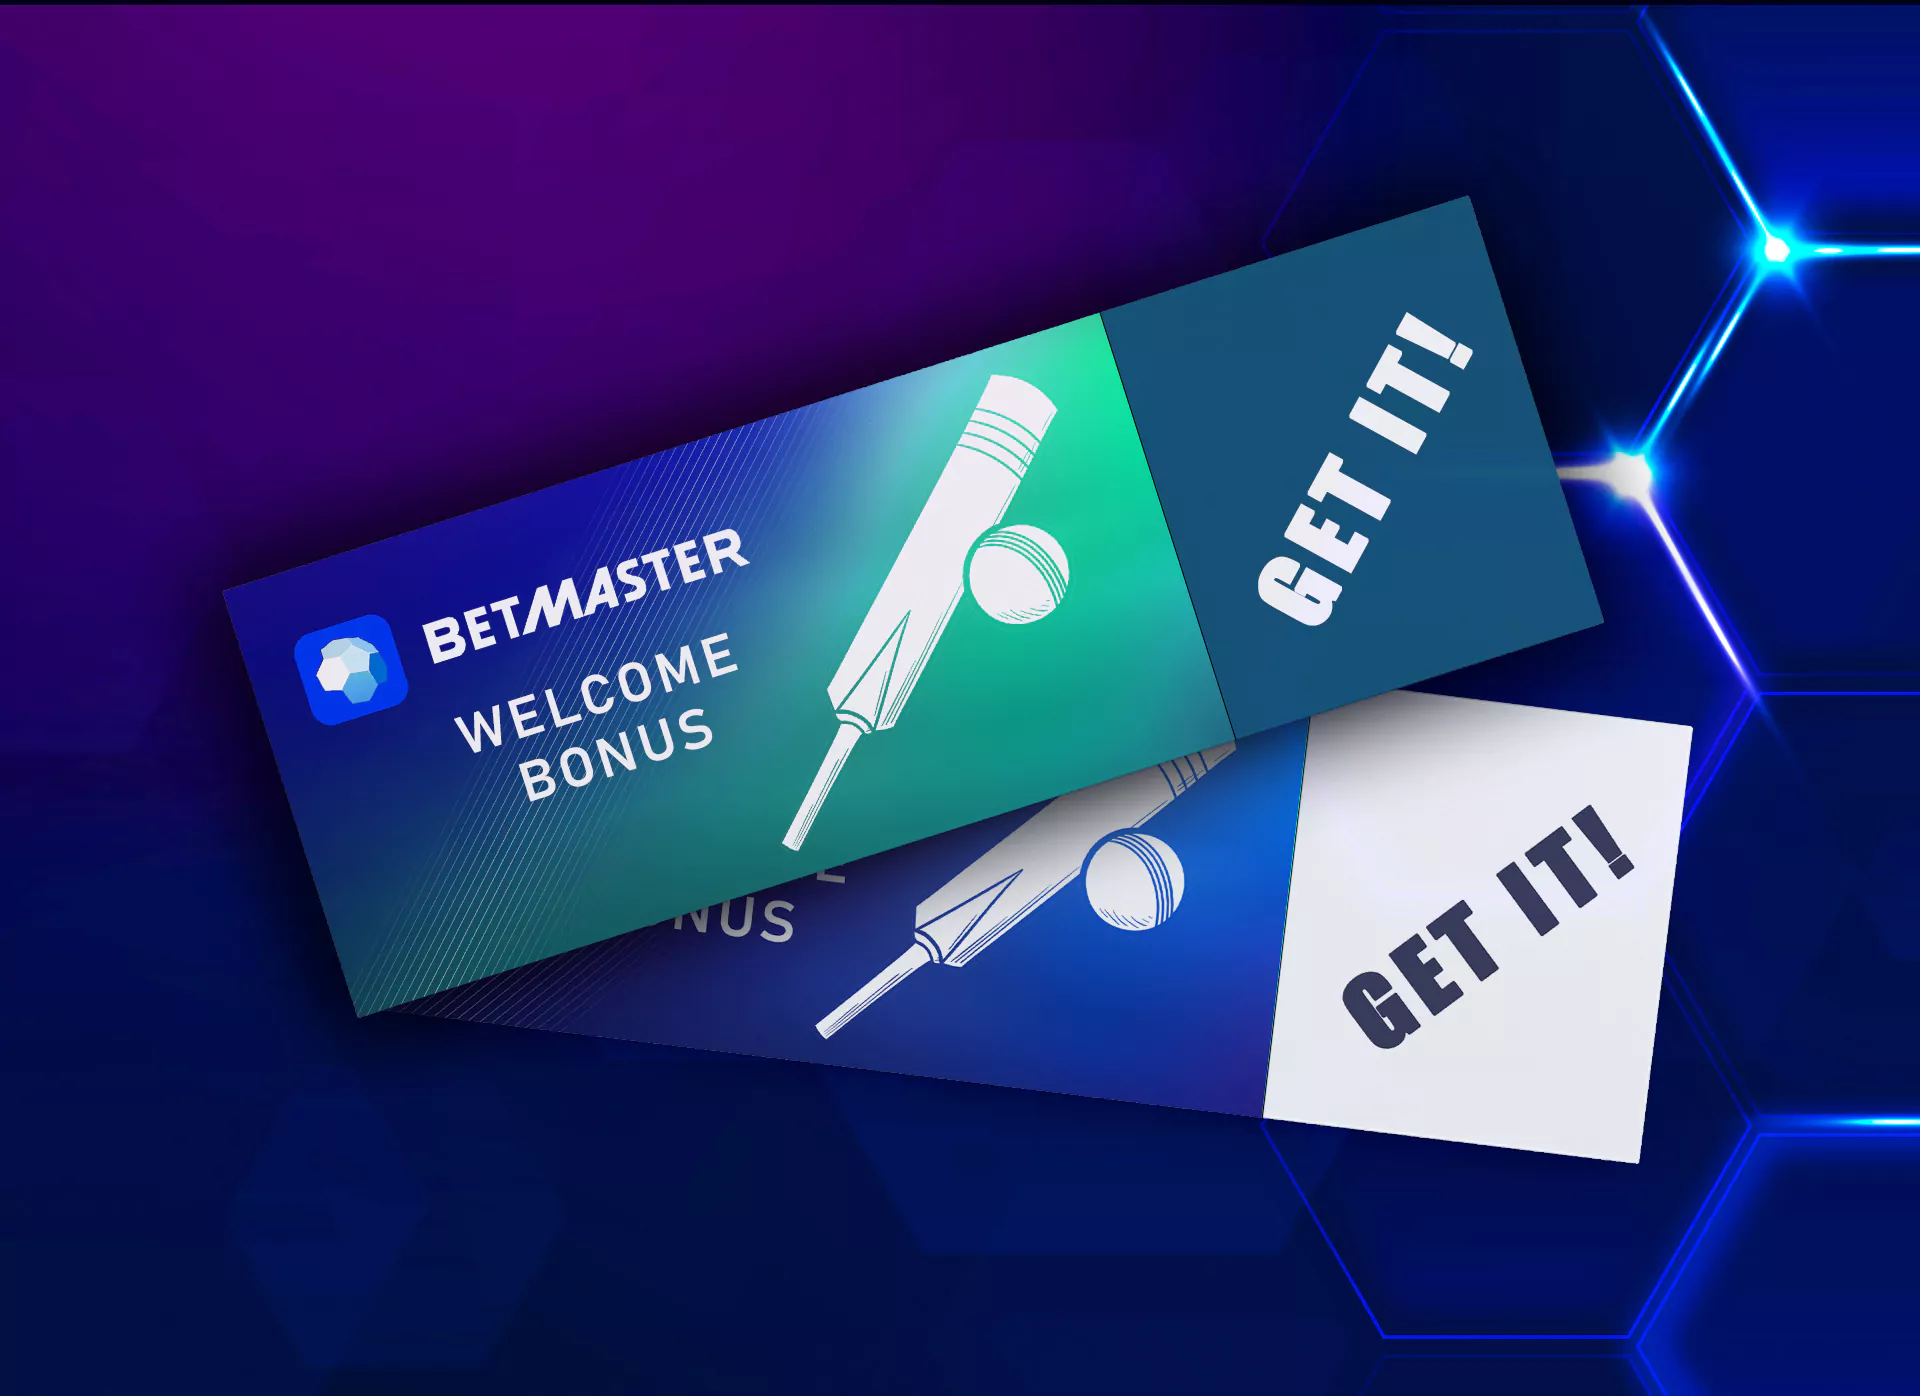 If you are a new user of Betmaster you can claim a welcome bonus.